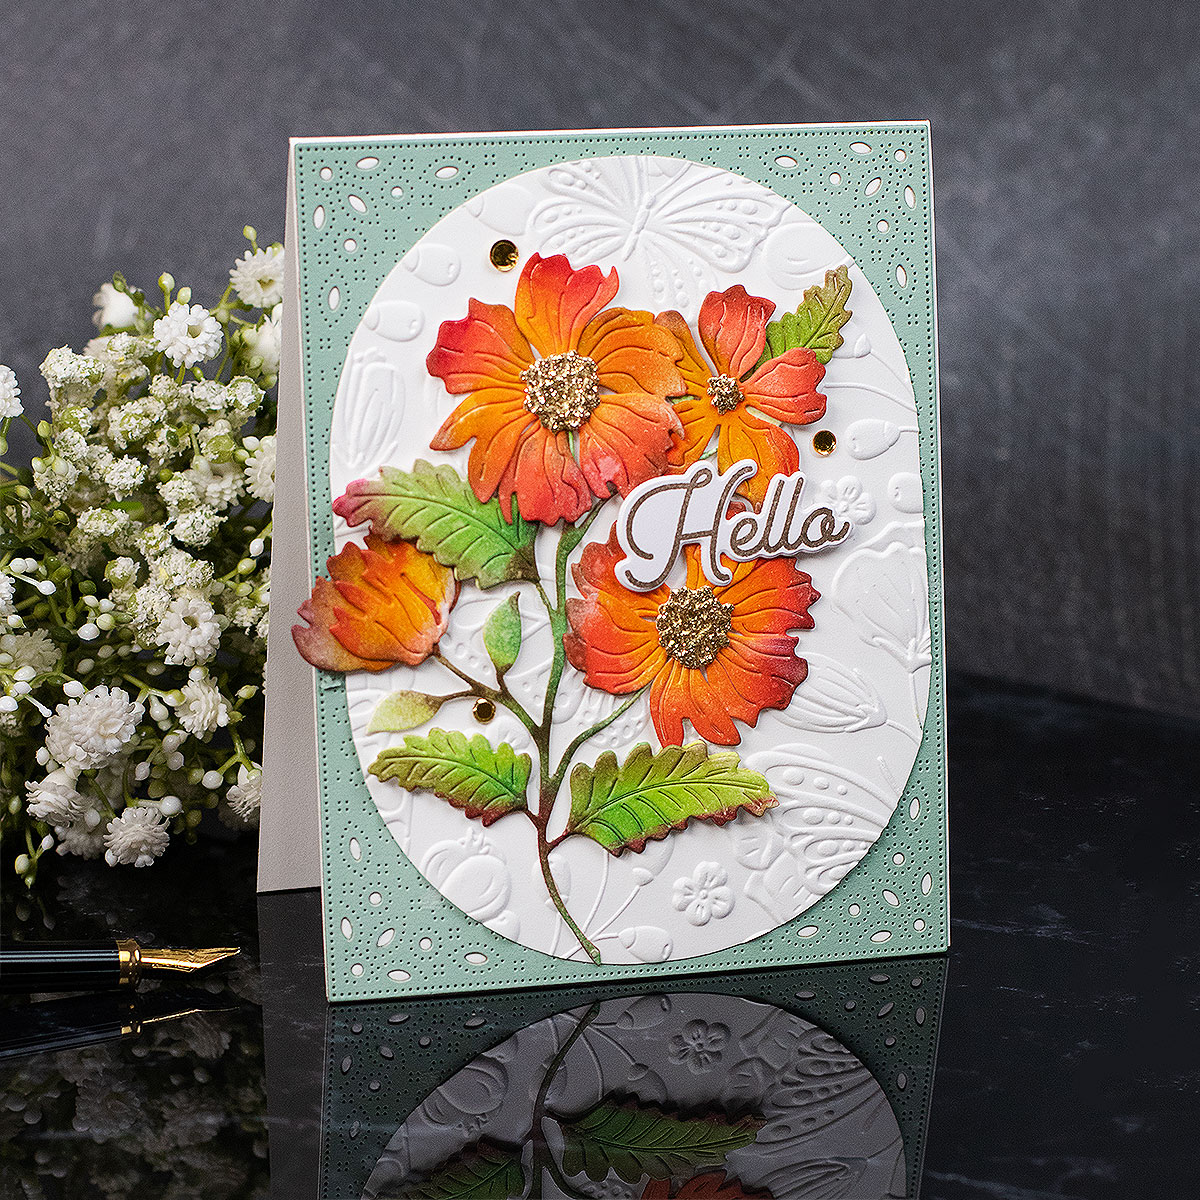 Spellbinders Etched Dies from The Stylish Ovals Collection-Infinity Punch & Pierce Plate